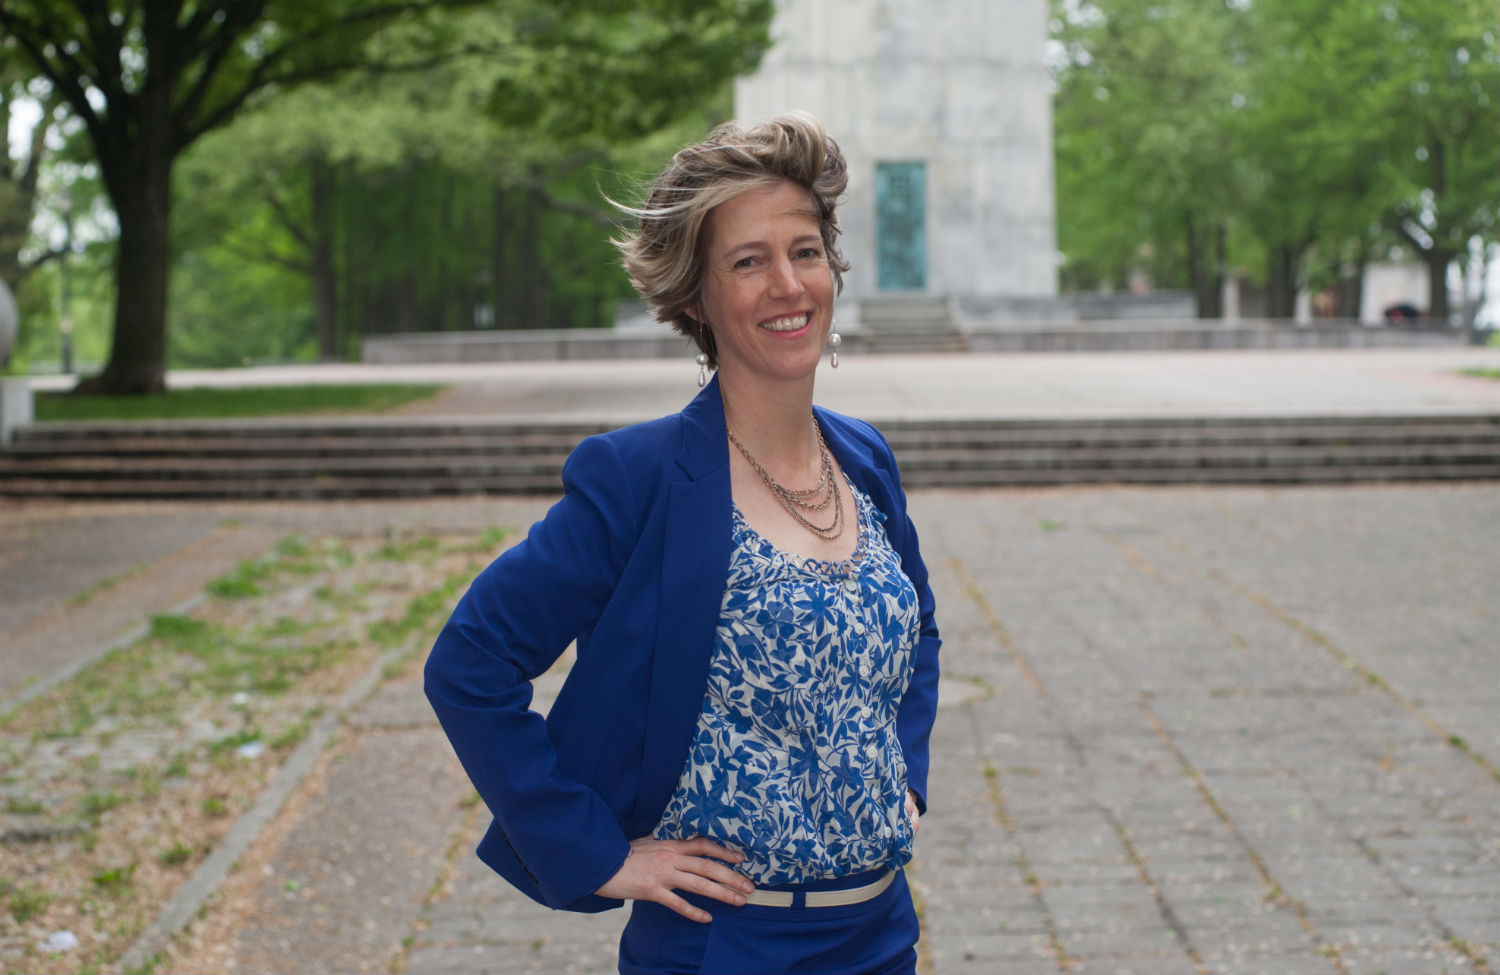 How Zephyr Teachout Taught Democrats a Lesson in Democracy